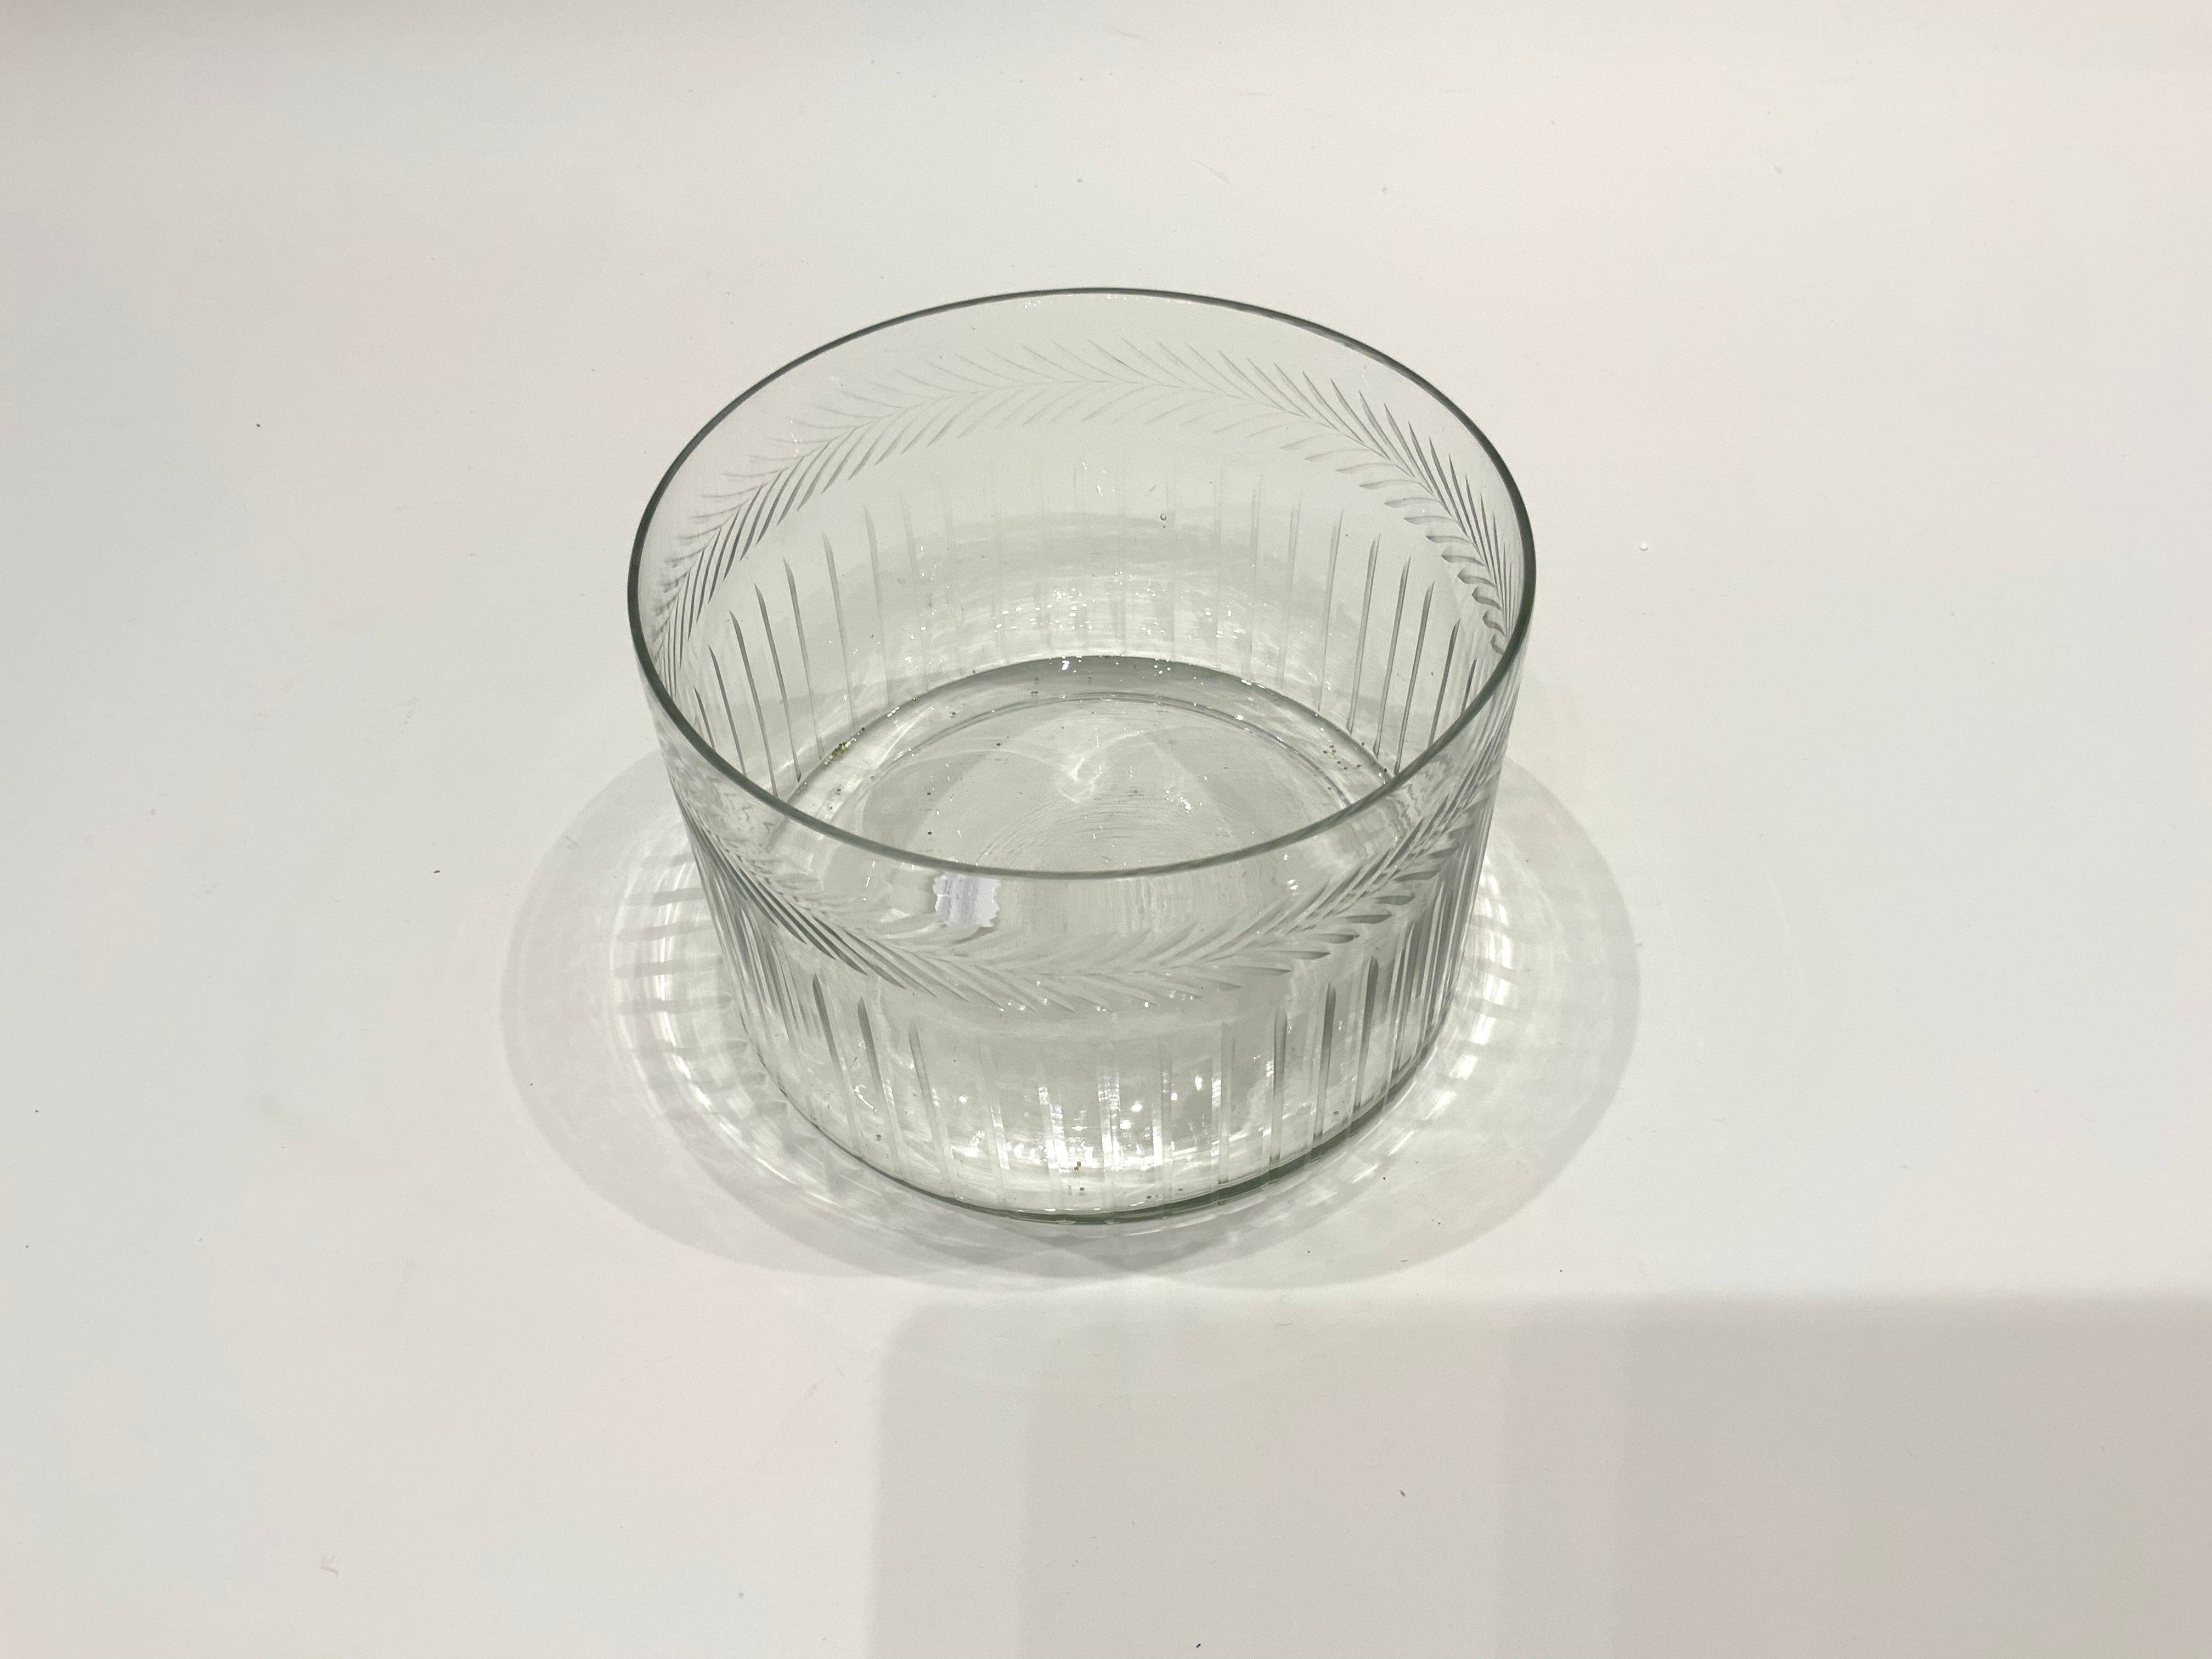 Translucent Glass Bowl with fluted Design